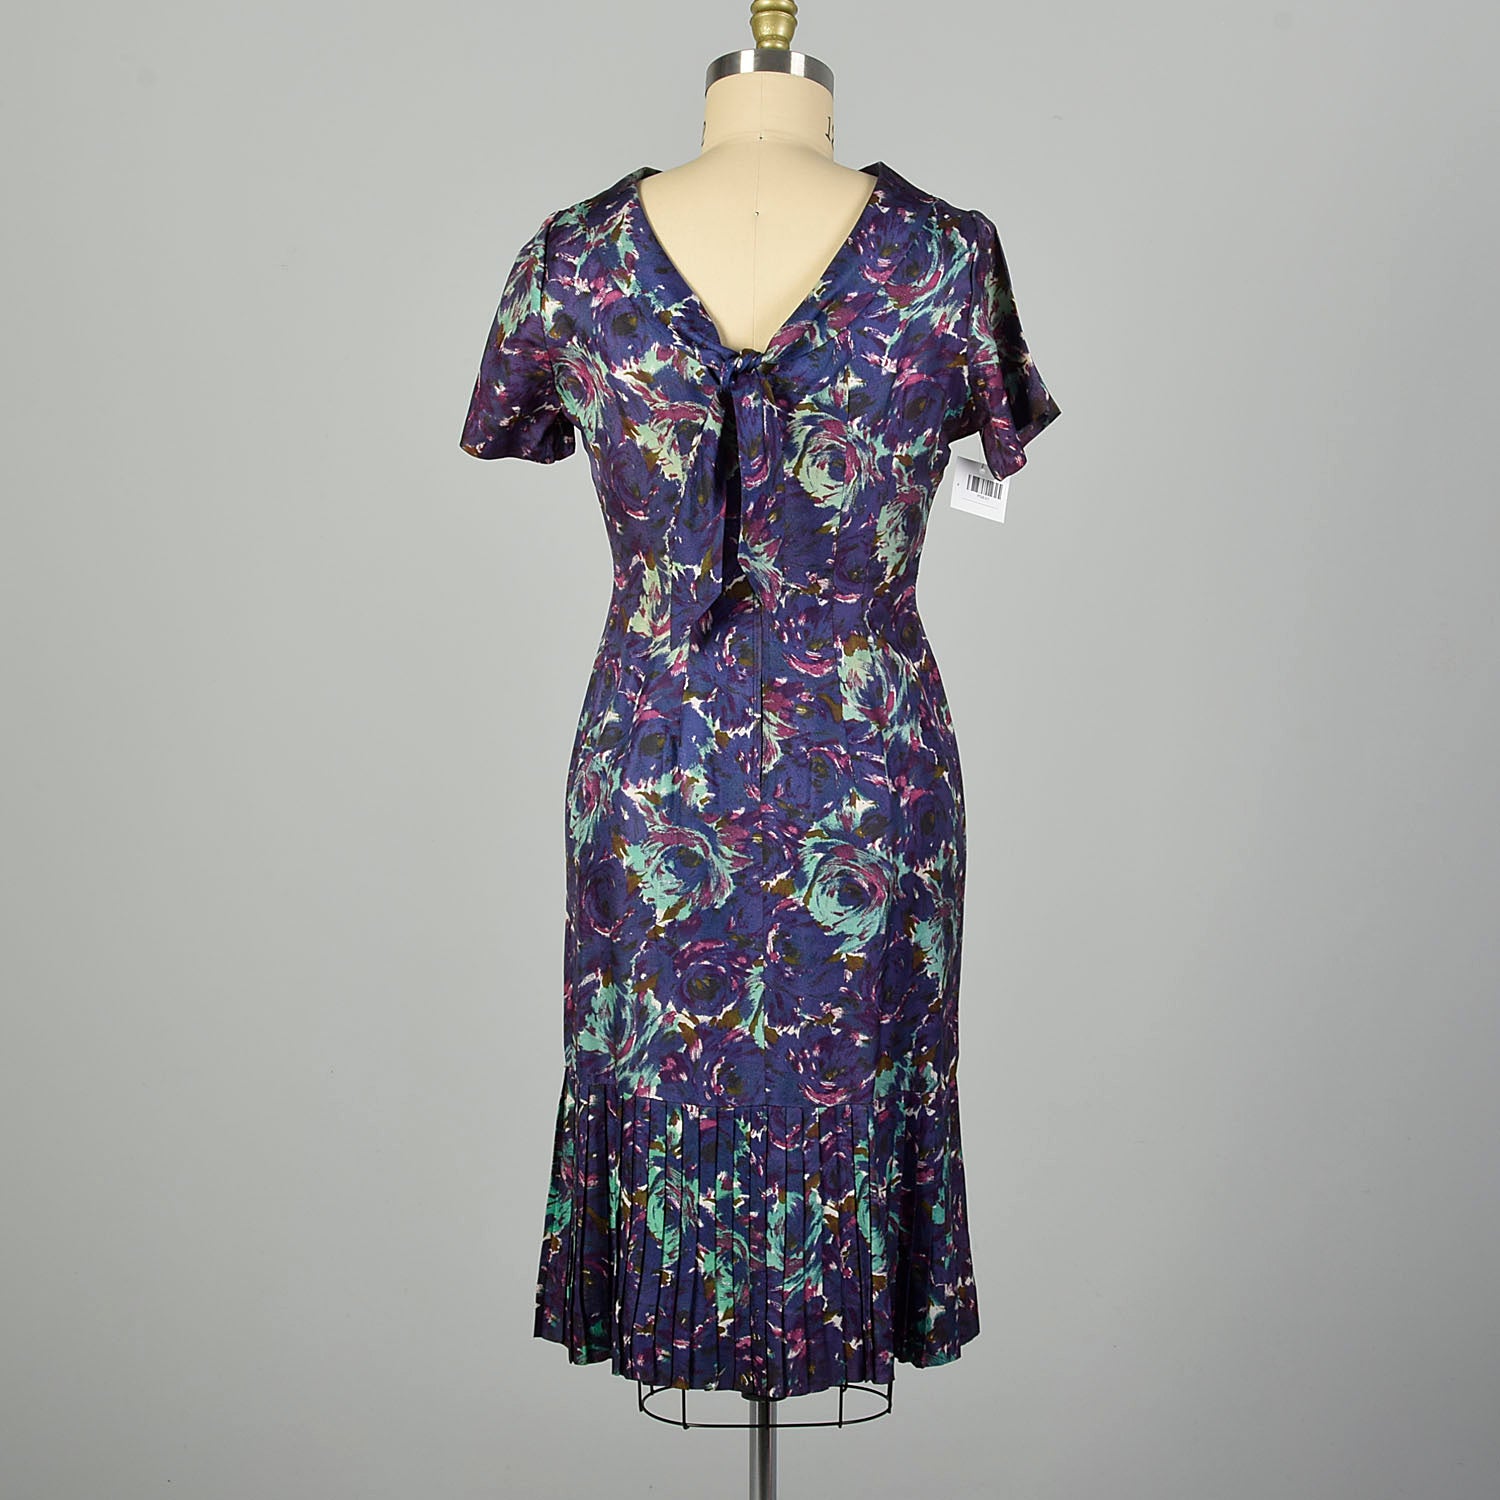 Large 1950s Blue and Purple Swirl Patterned Acetate Dress